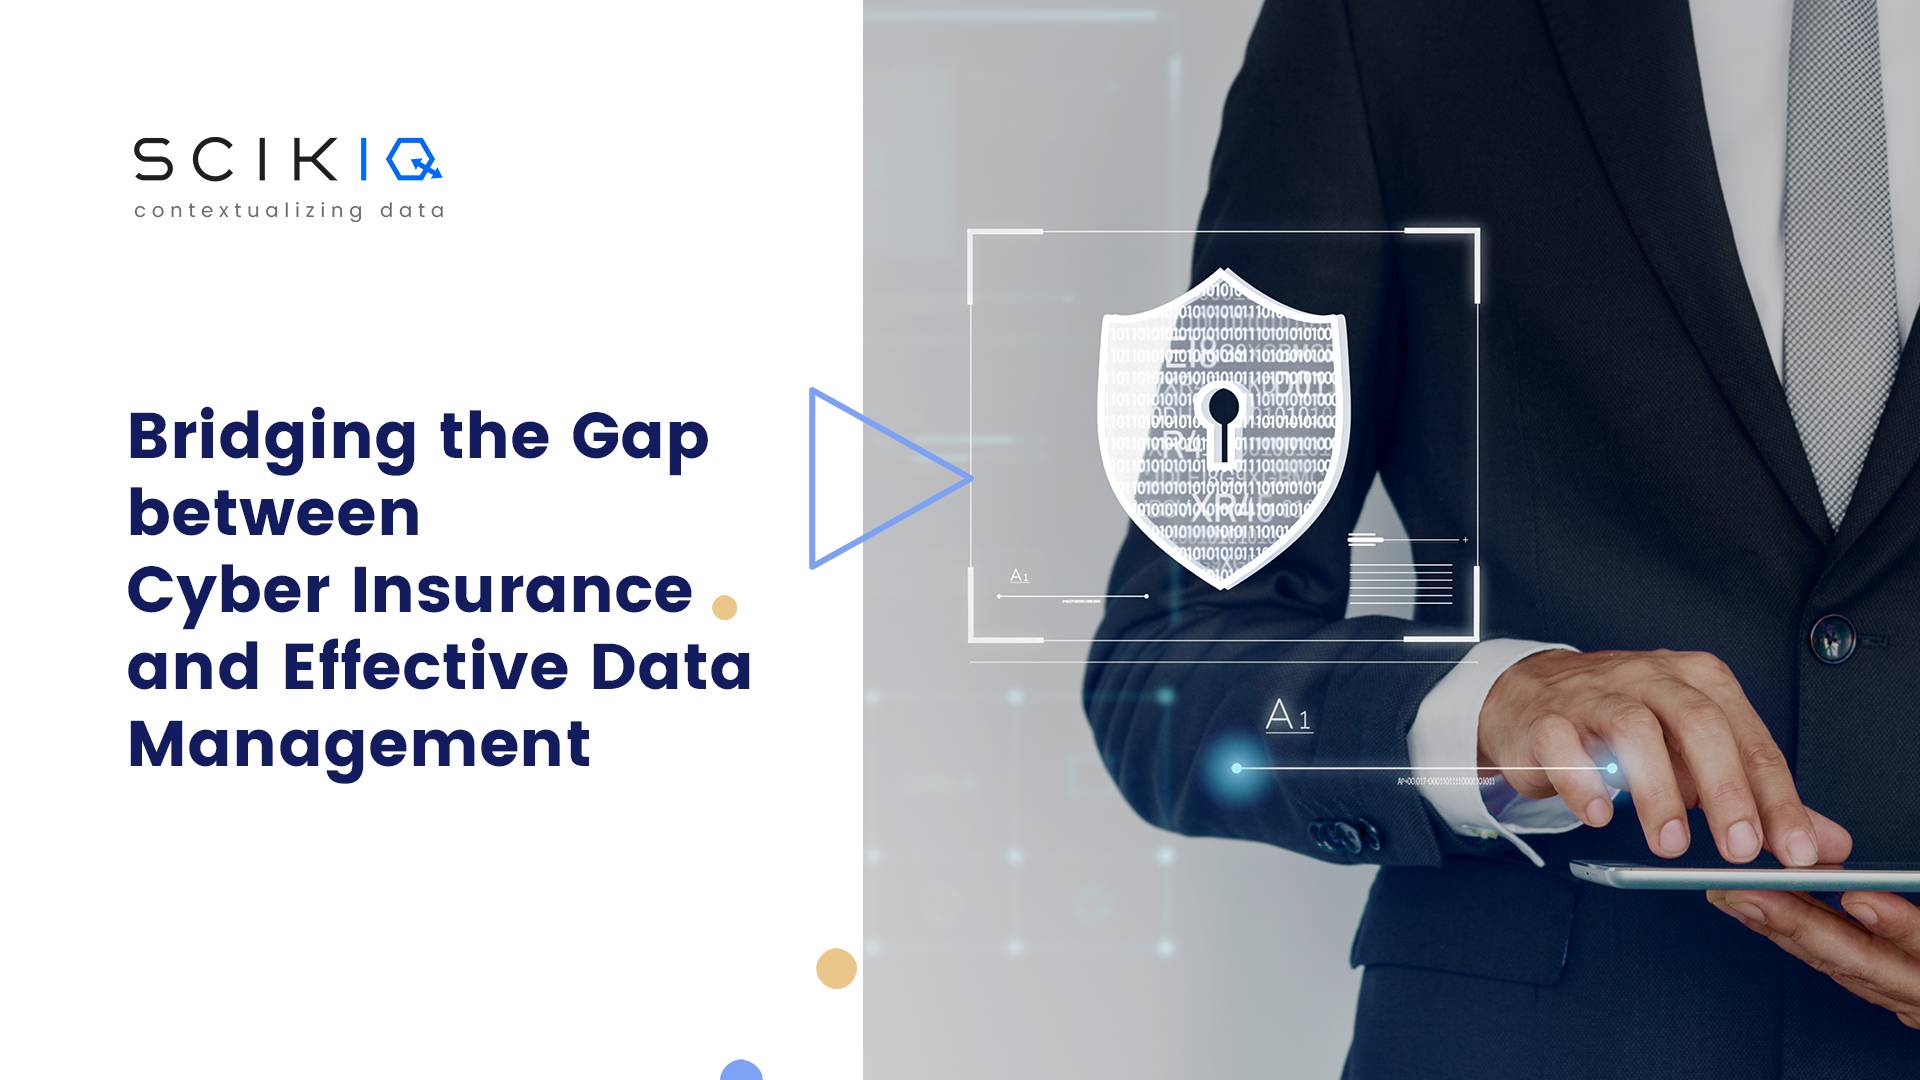 Bridging the Gap between Cyber Insurance and Effective Data Management